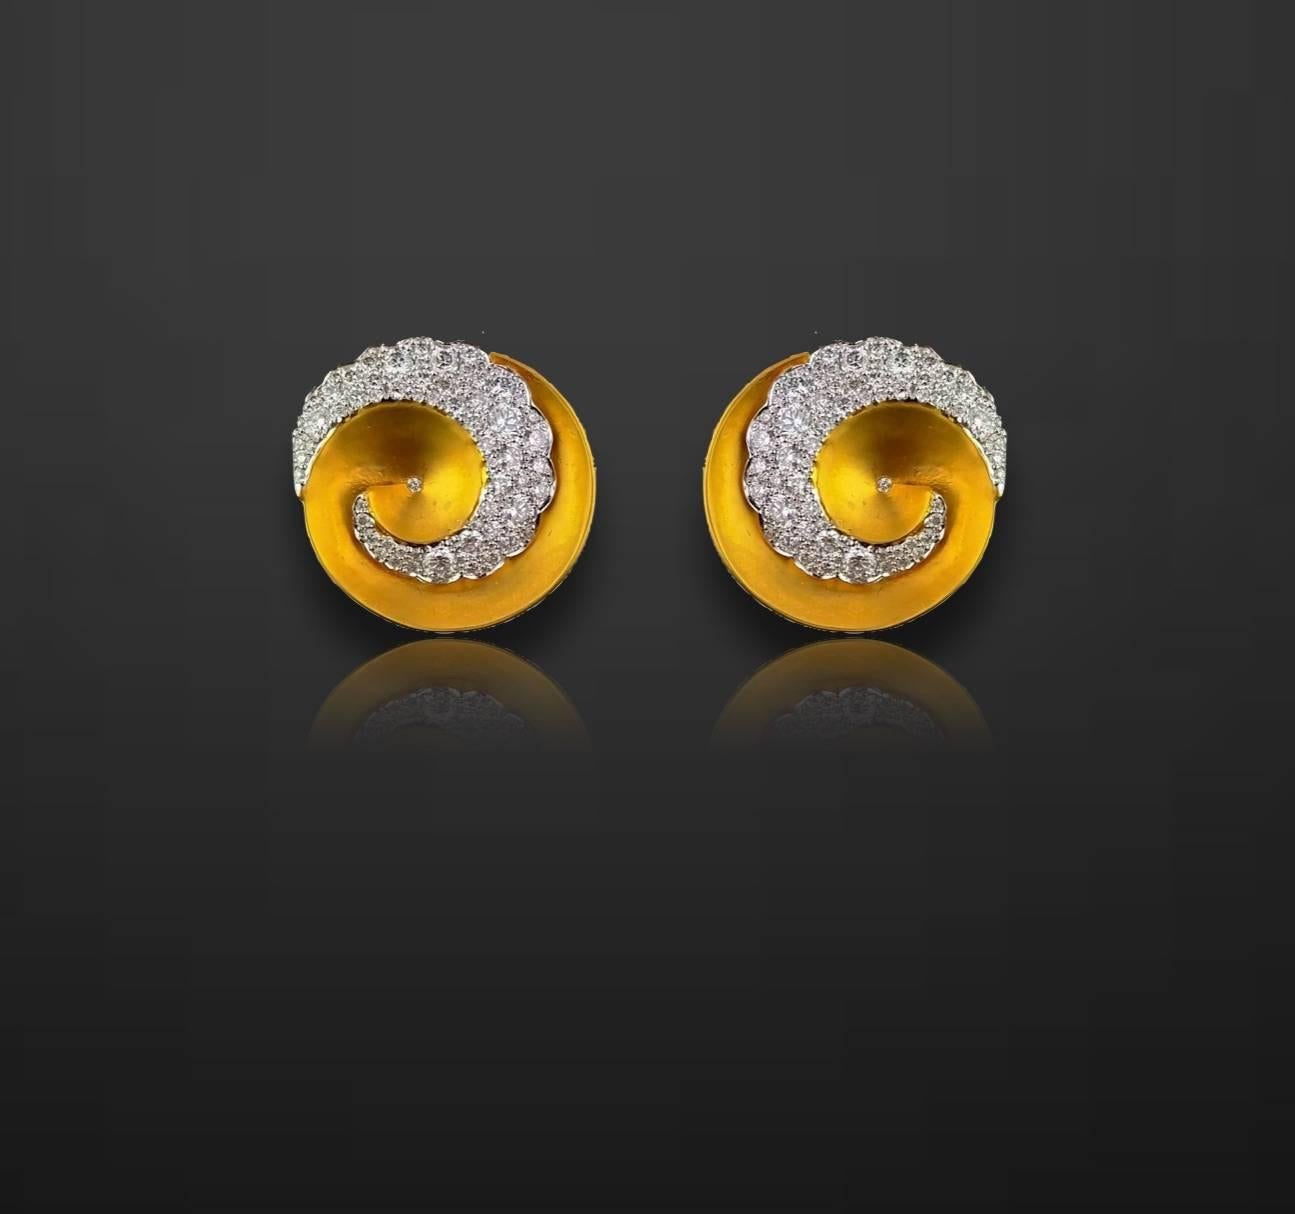 A pair of beautiful, contemporary 18K yellow gold stud earrings, with white diamonds.

Diamond Details: 
Total Carat Weight: 2.49 carat 
Quality: VS/SI , H/I

18K Gold: 4.60 grams  